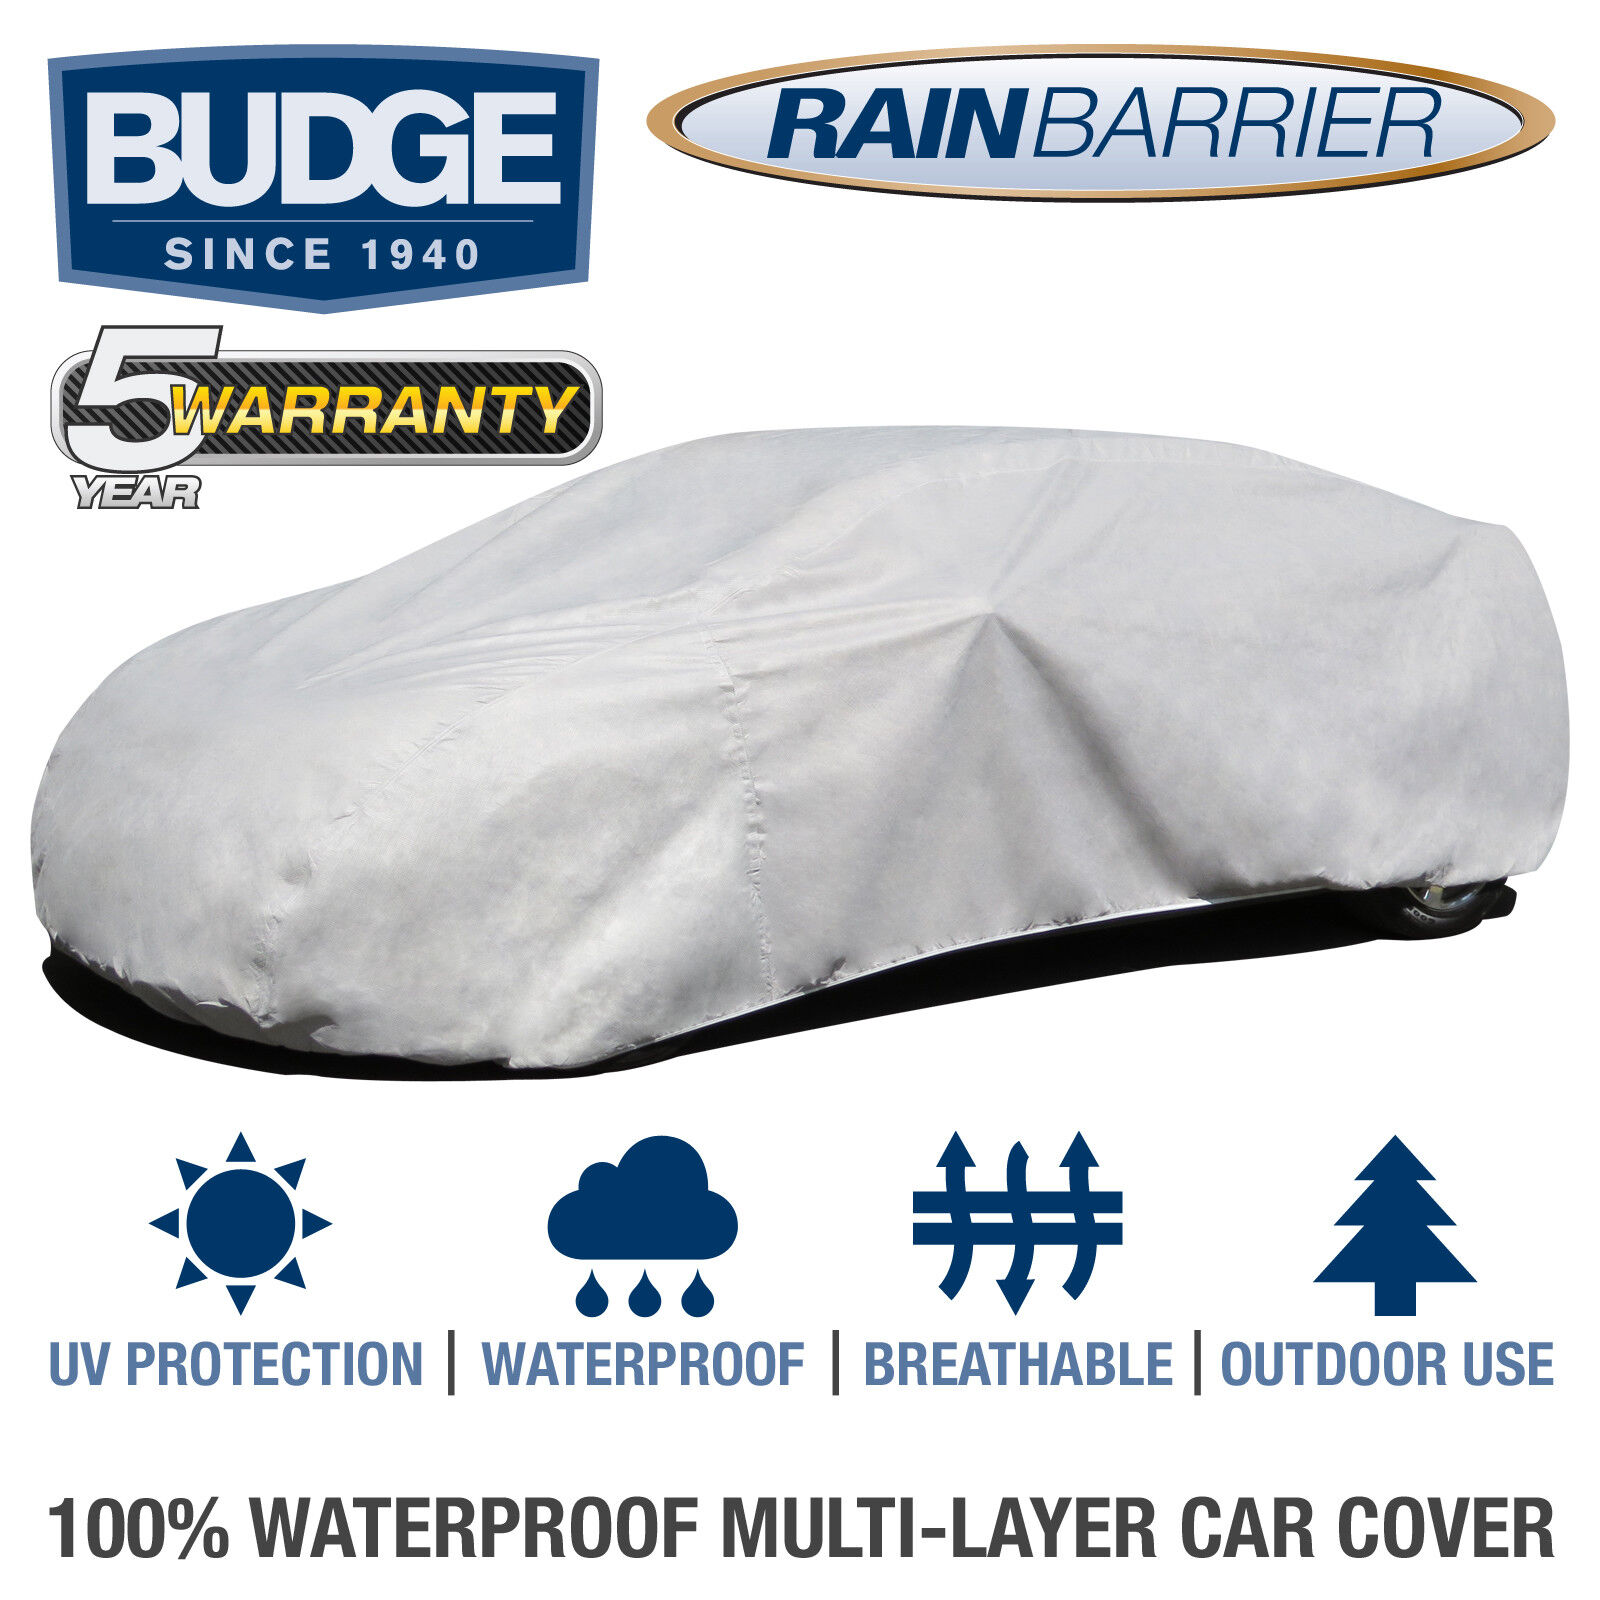 Budge Rain Barrier Car Cover Fits Sedans up to 19\' Long| Waterproof | Breathable